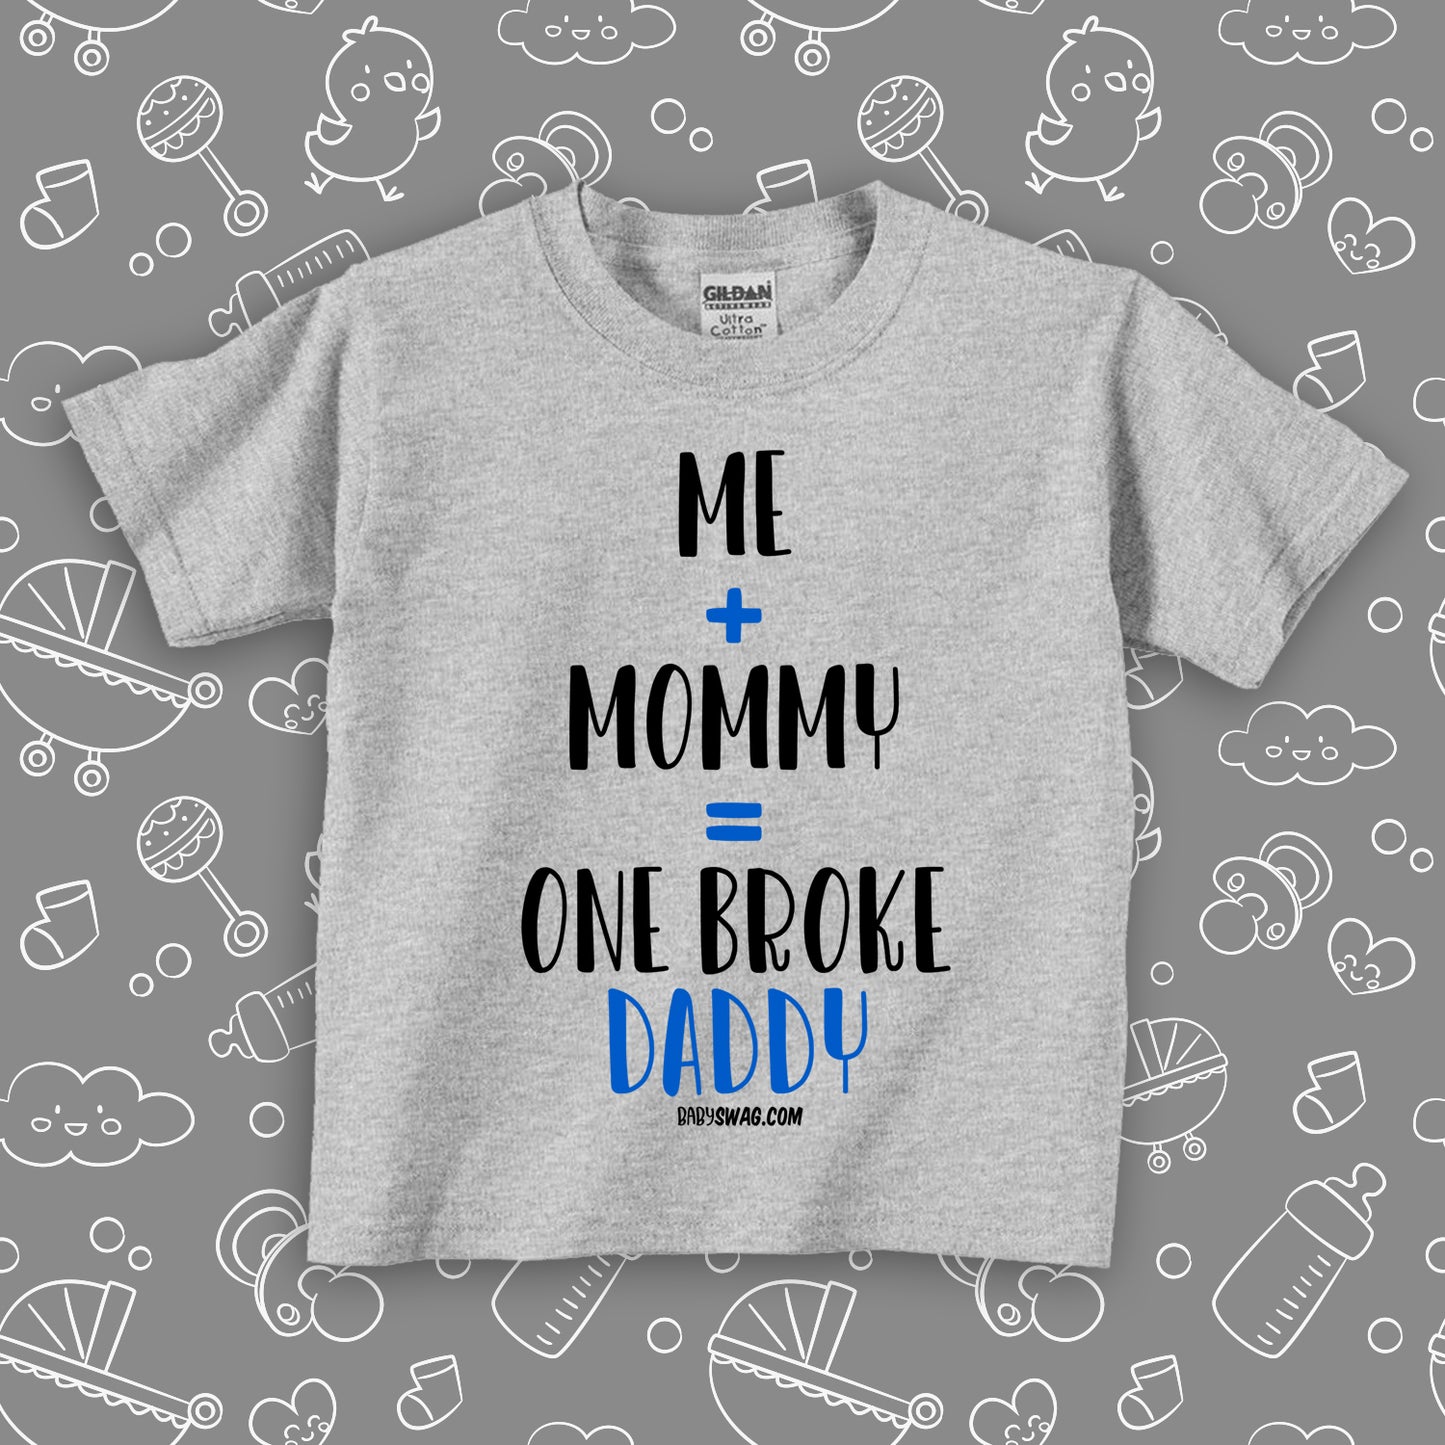 Toddler shirts with caption "Me + Mommy = One Broke Daddy" in grey.  